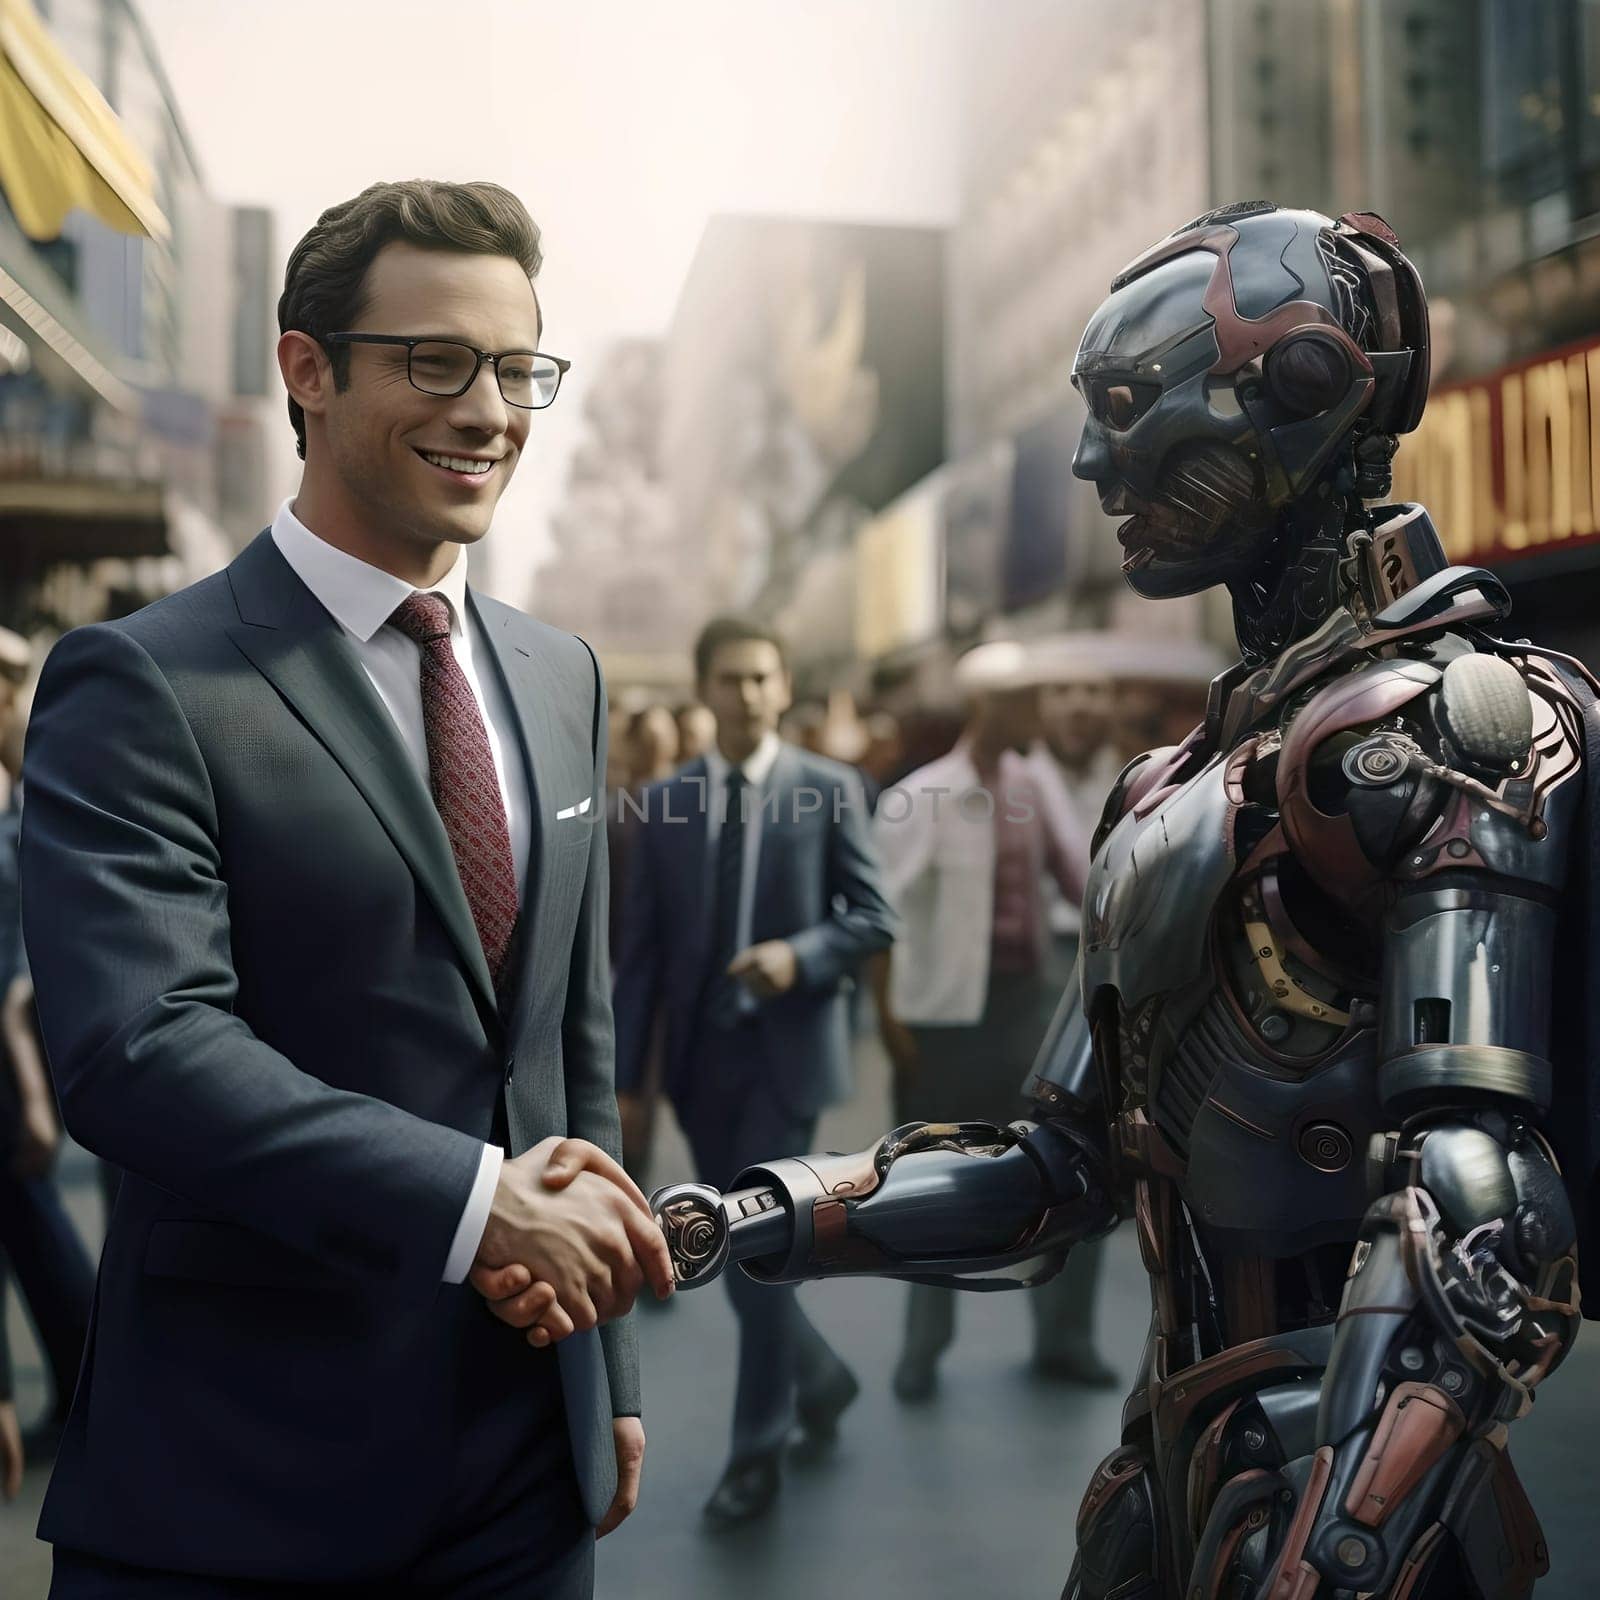 A metal robot shakes hands with a man in a suit. A city with people in the background